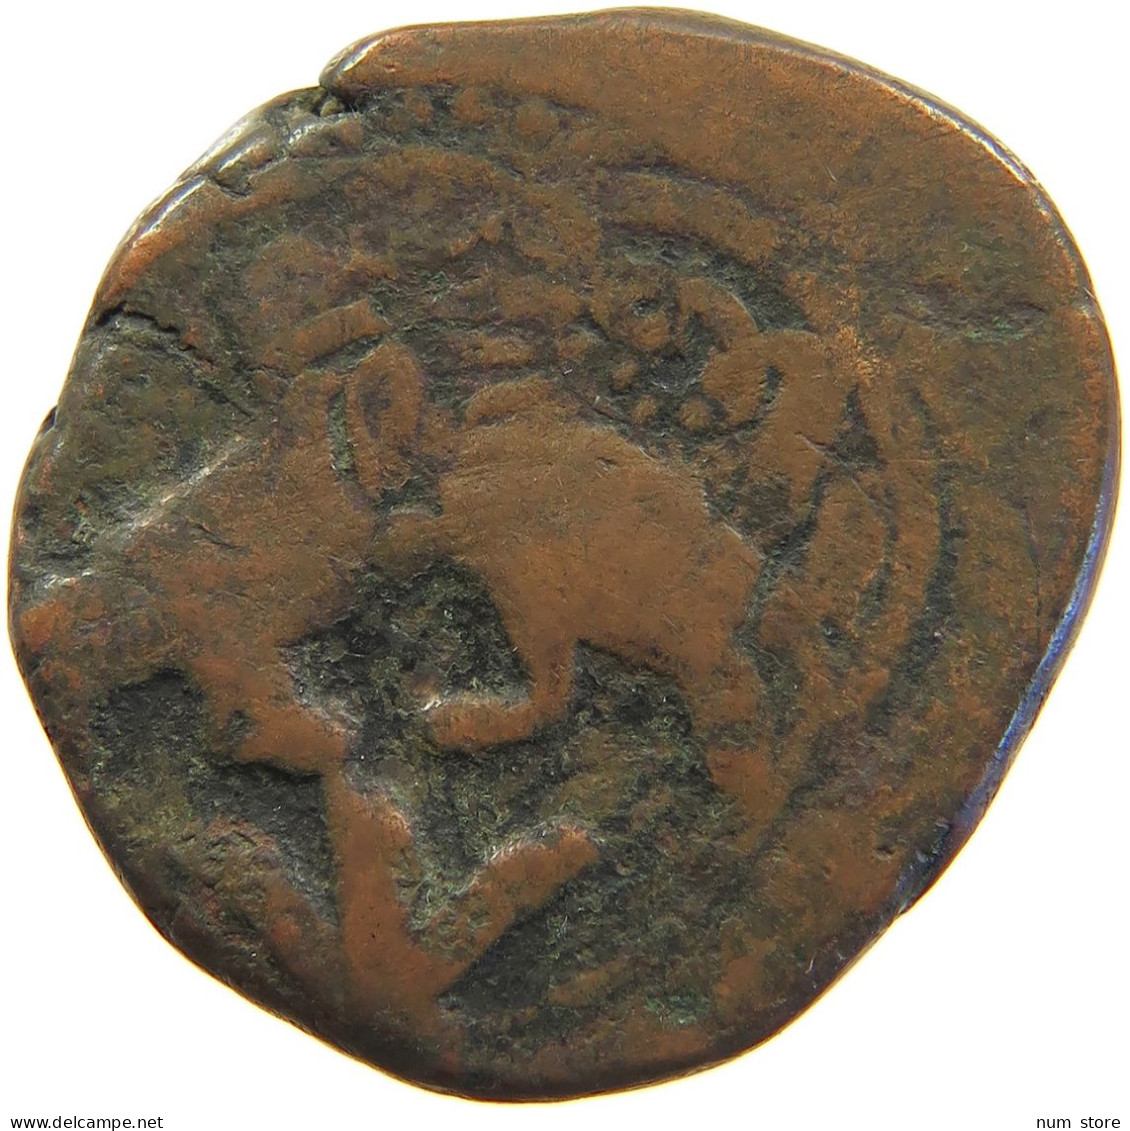 ISLAMIC FALUS TWO LIONS FIGURATIVE COINAGES IRAN / PERSIA / AFGHANISTAN 27MM 16.2G #t034 0139 - Irán